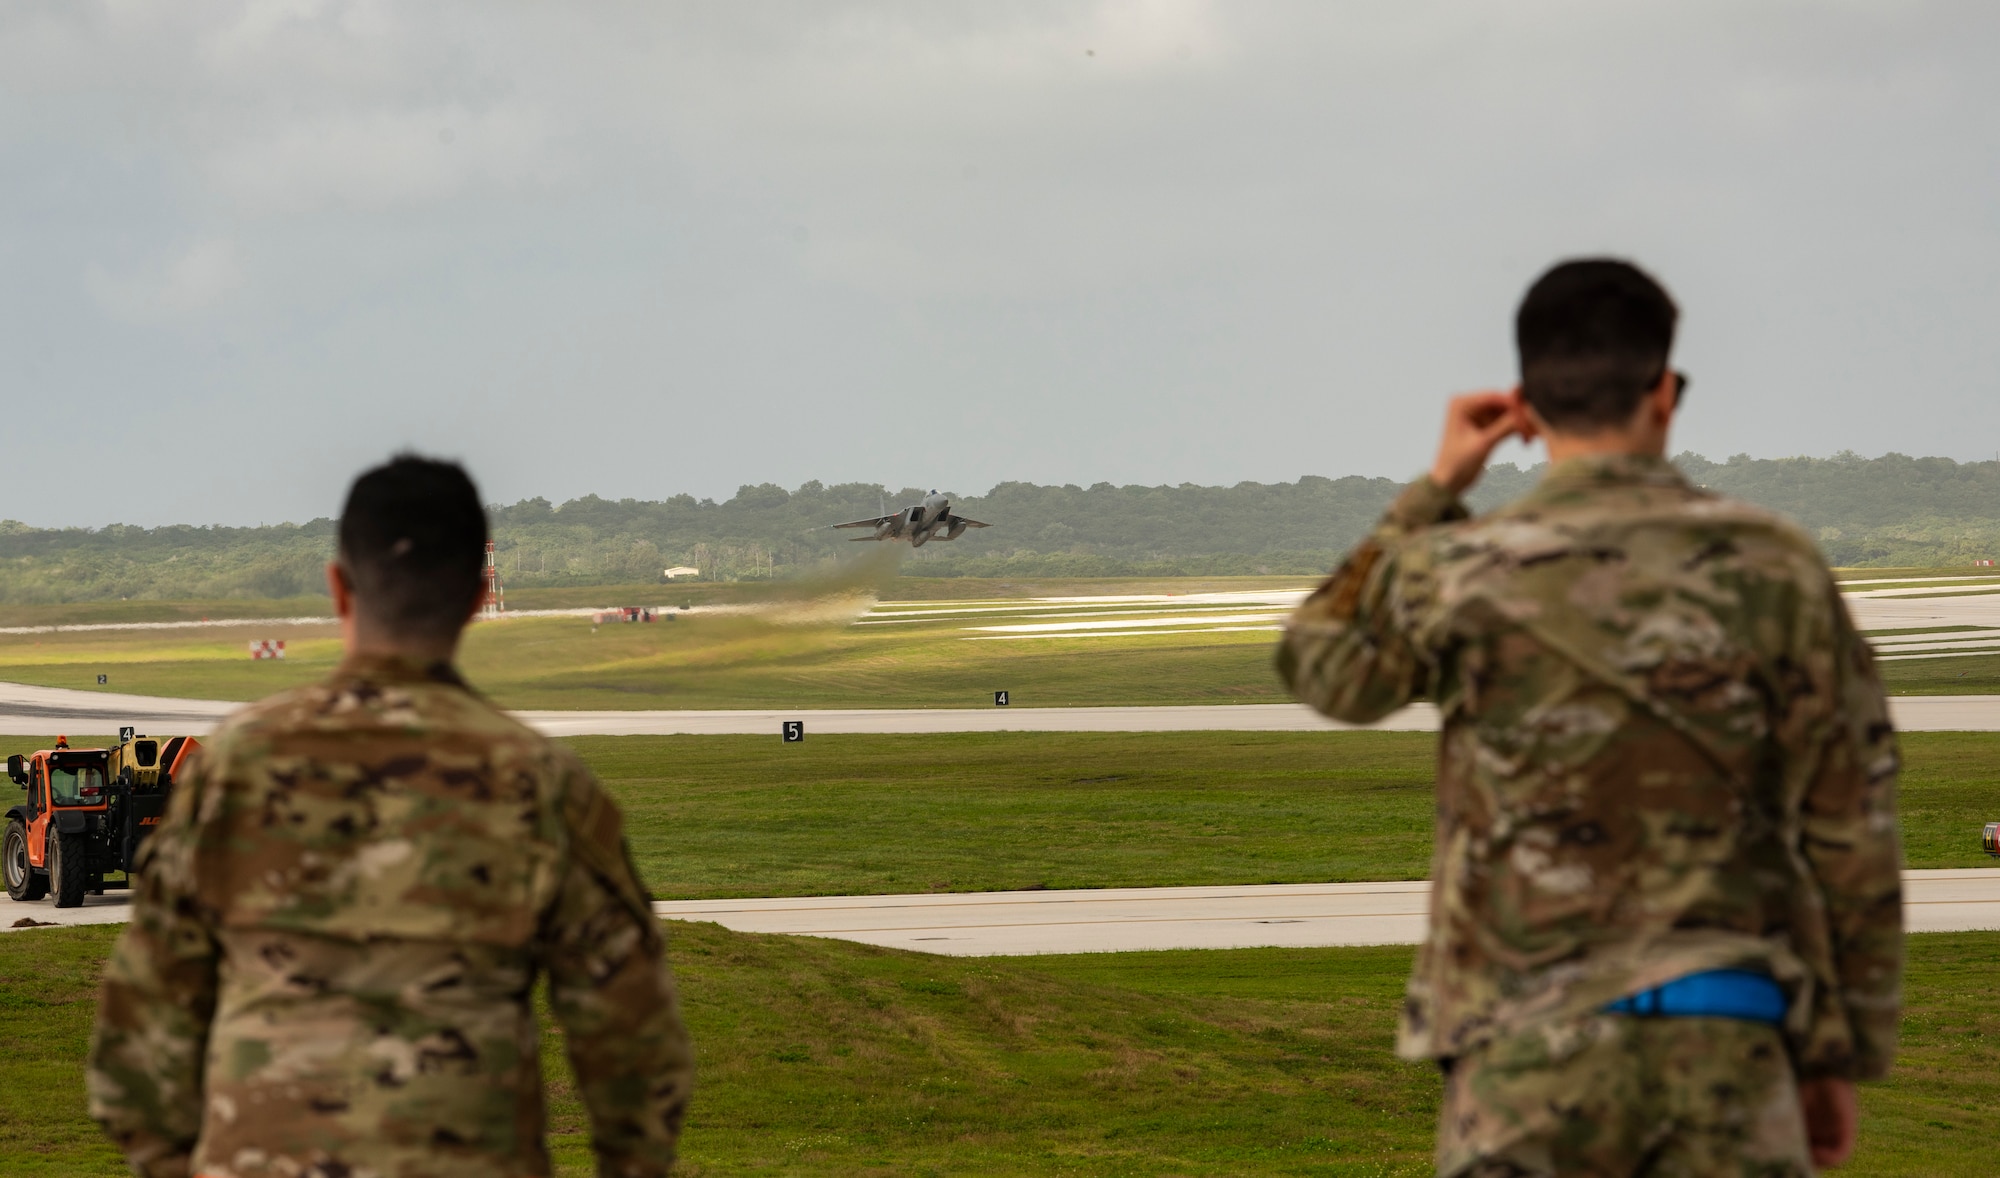 Members from Team Andersen watch a U.S. Air Force F-15C take off from Andersen Air Force Base, Guam, during a take-off viewing day for exercise Cope North 22, Feb. 9, 2022. Service members, their families and civic leaders were invited to the flight line to learn the importance of Cope North while observing aircraft capabilities.  Exercise Cope North is the U.S. Pacific Air Forces’ largest multilateral exercise and includes more than 2, 500 U.S. Airmen, Marines, and Sailors working alongside 1,000 combined Japan Air Self-Defense Force and Royal Australian Air Force counterparts.